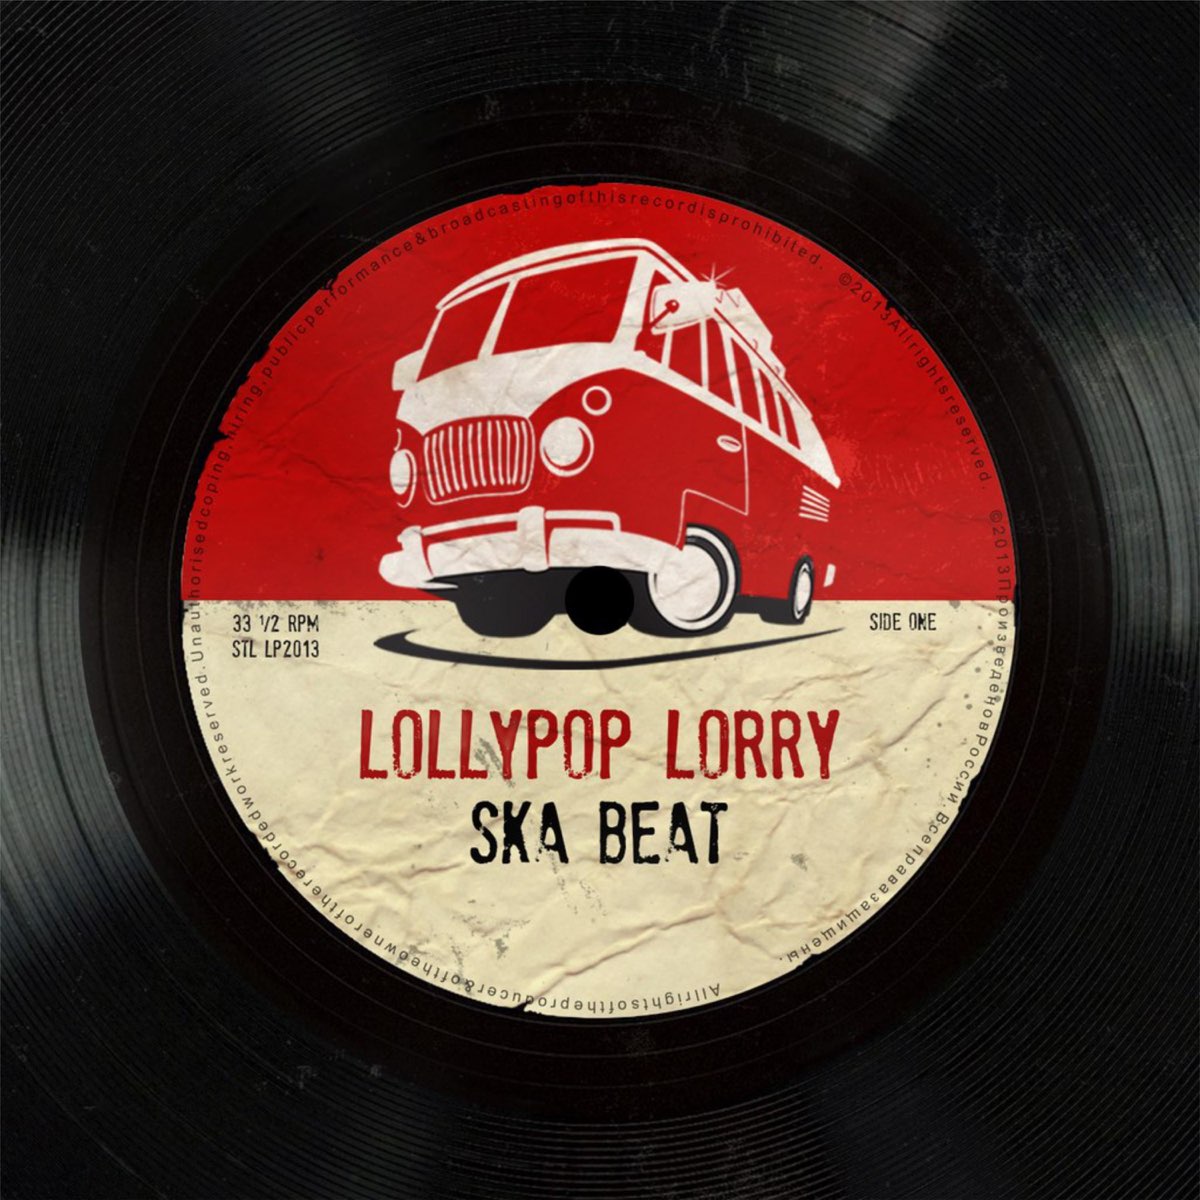 Ska Beat - EP by Lollypop Lorry on Apple Music